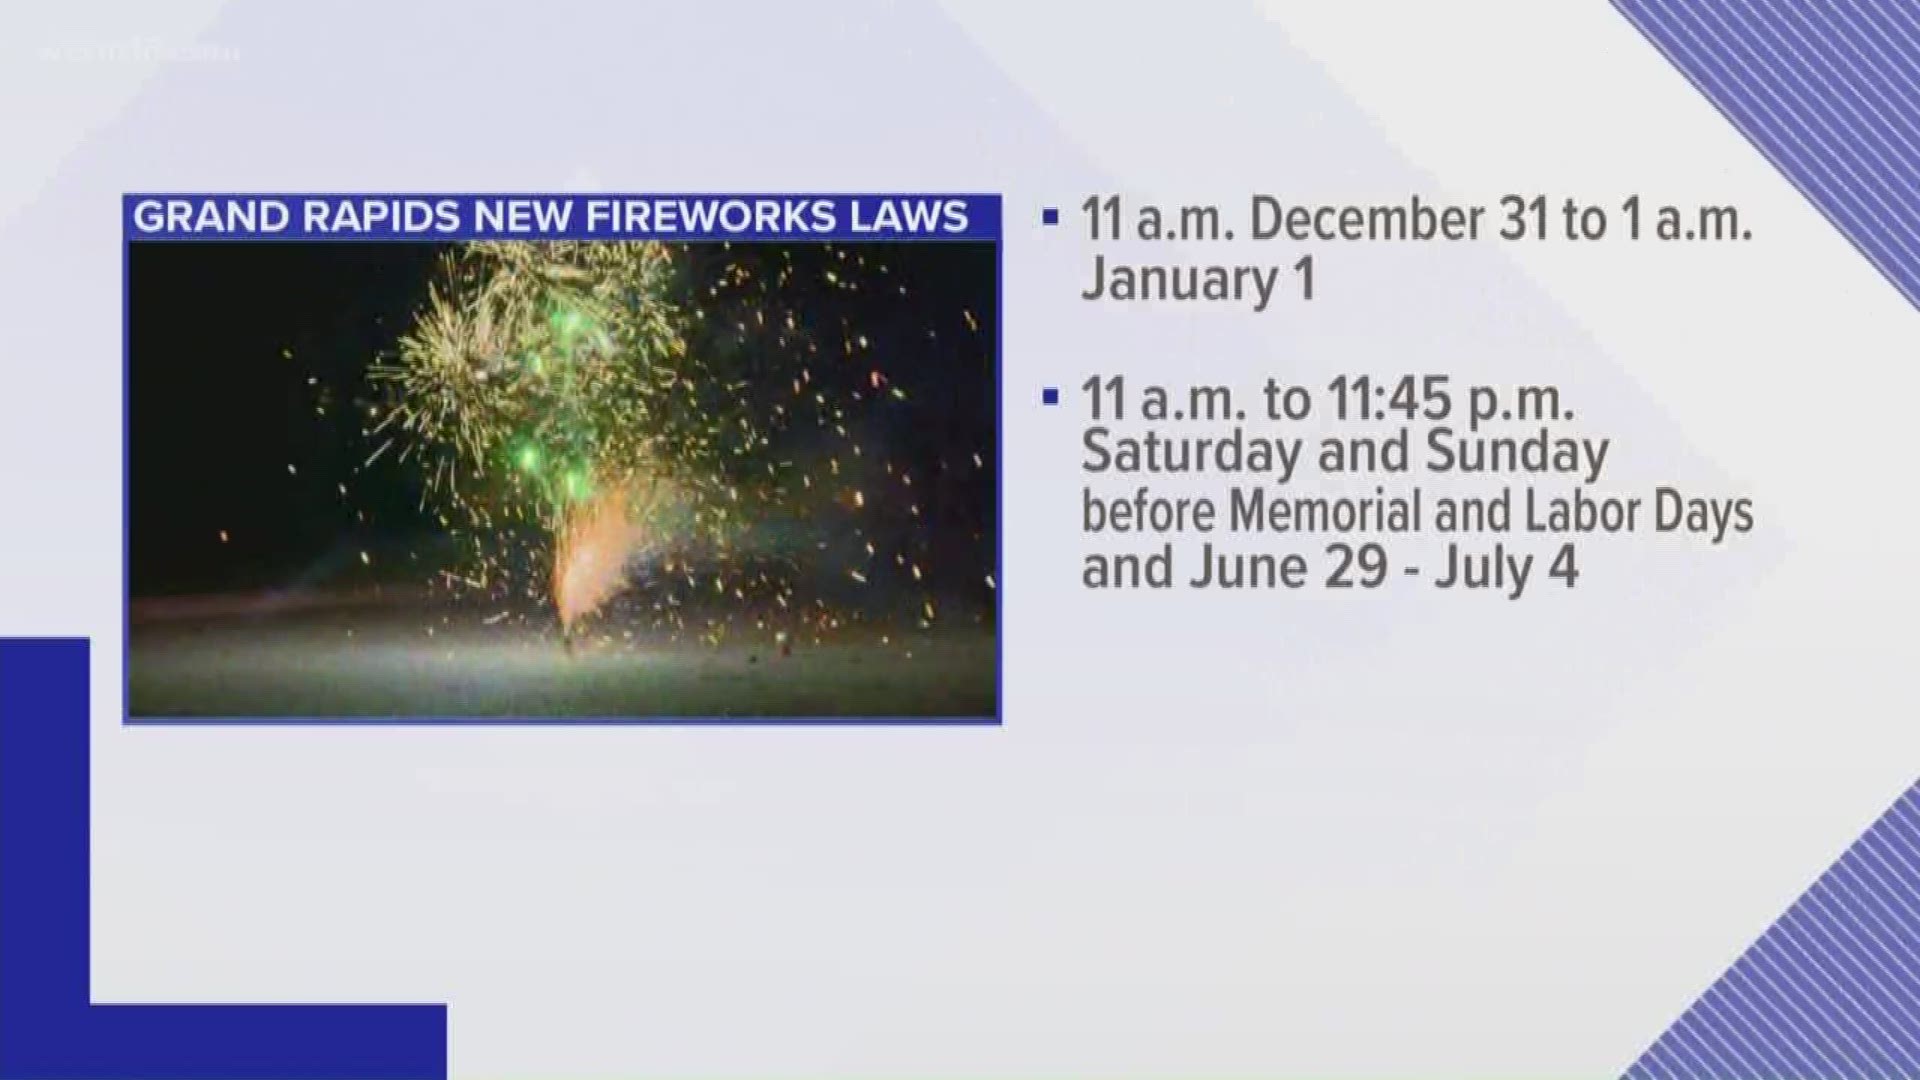 City of Grand Rapids reduces days fireworks can be set off